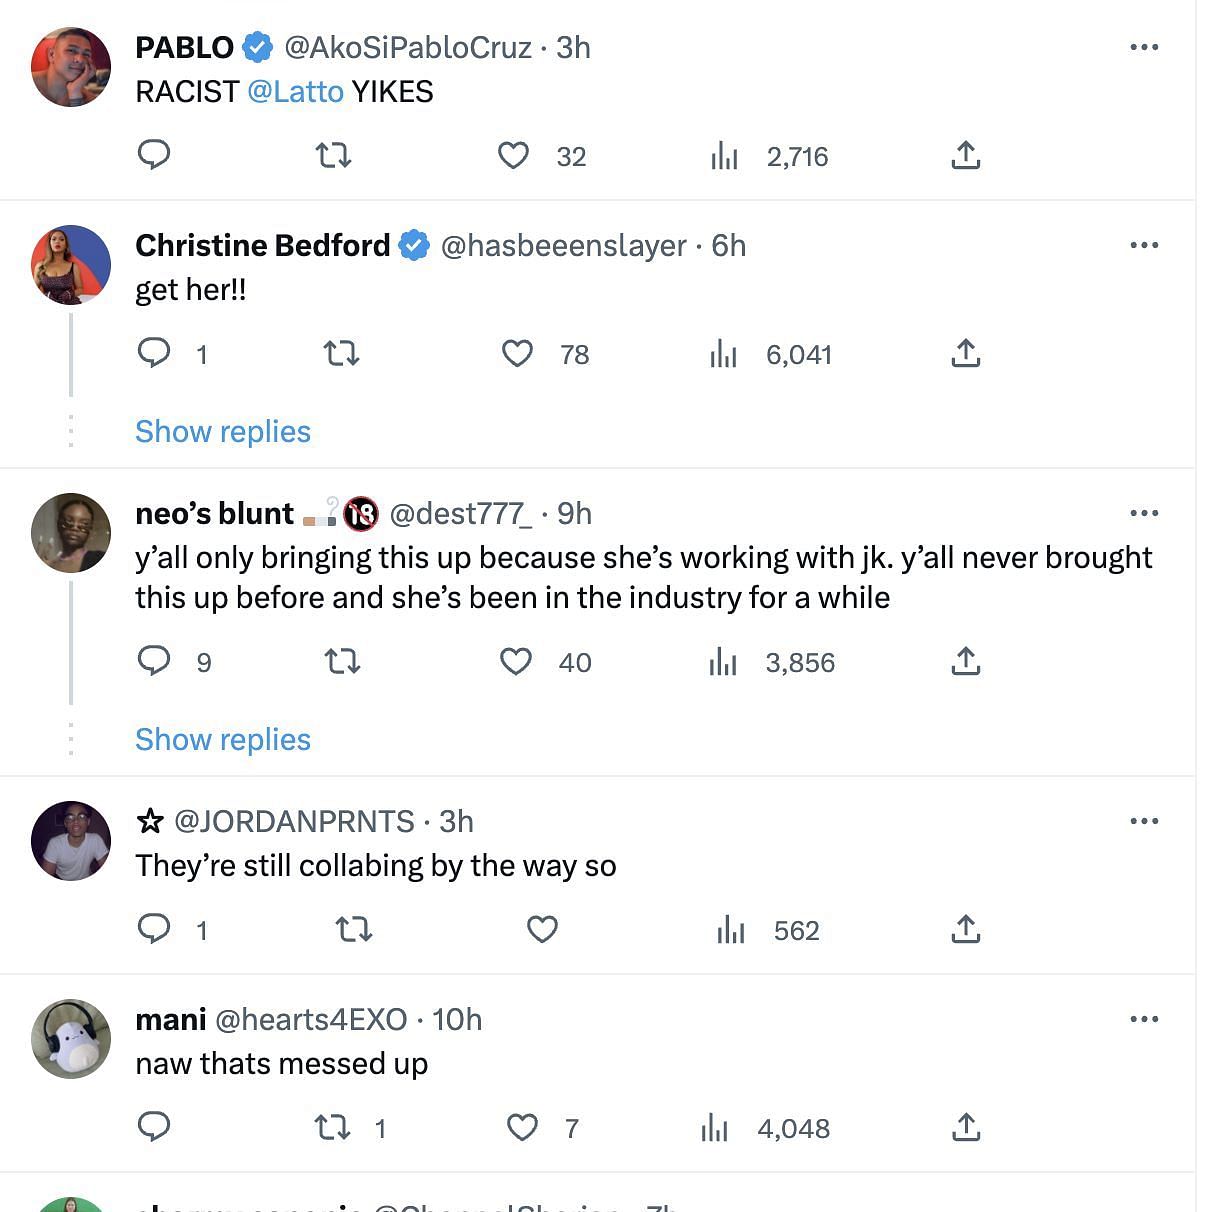 Social media users commented on the rapper&#039;s racist tweets and called them insensitive: Reactions explored. (Image via Twitter)